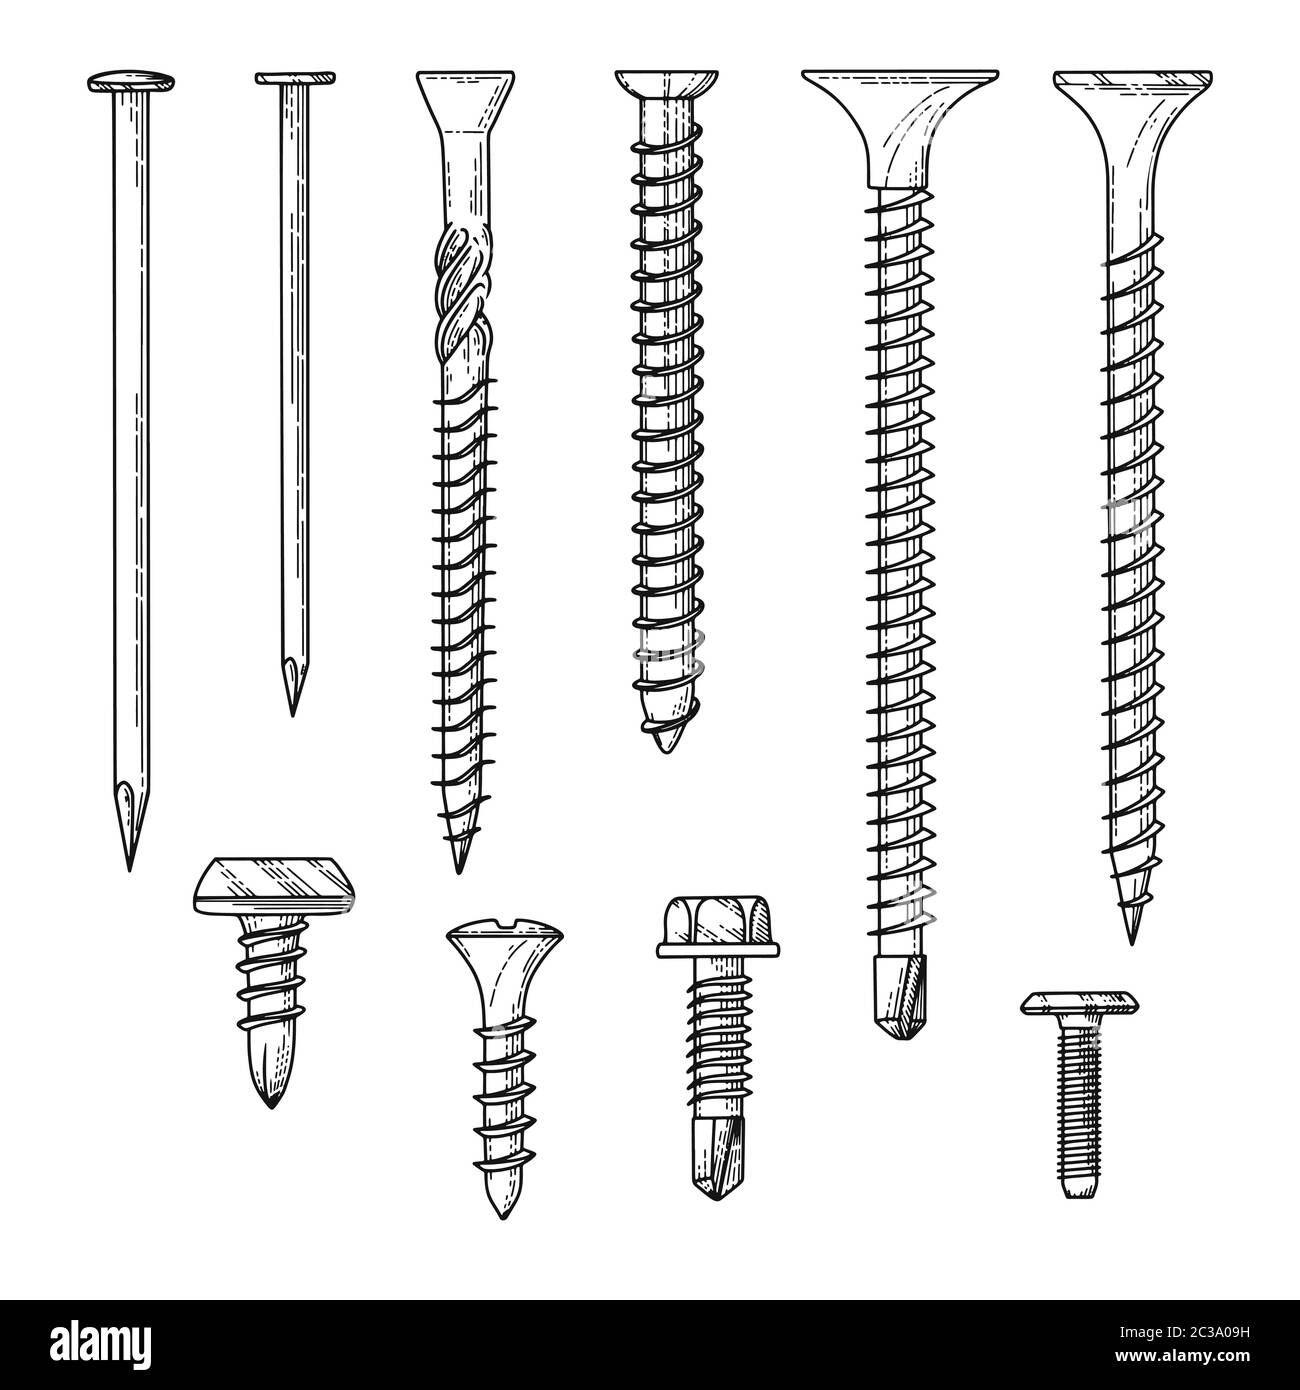 Iron nails Stock Vector Images - Alamy